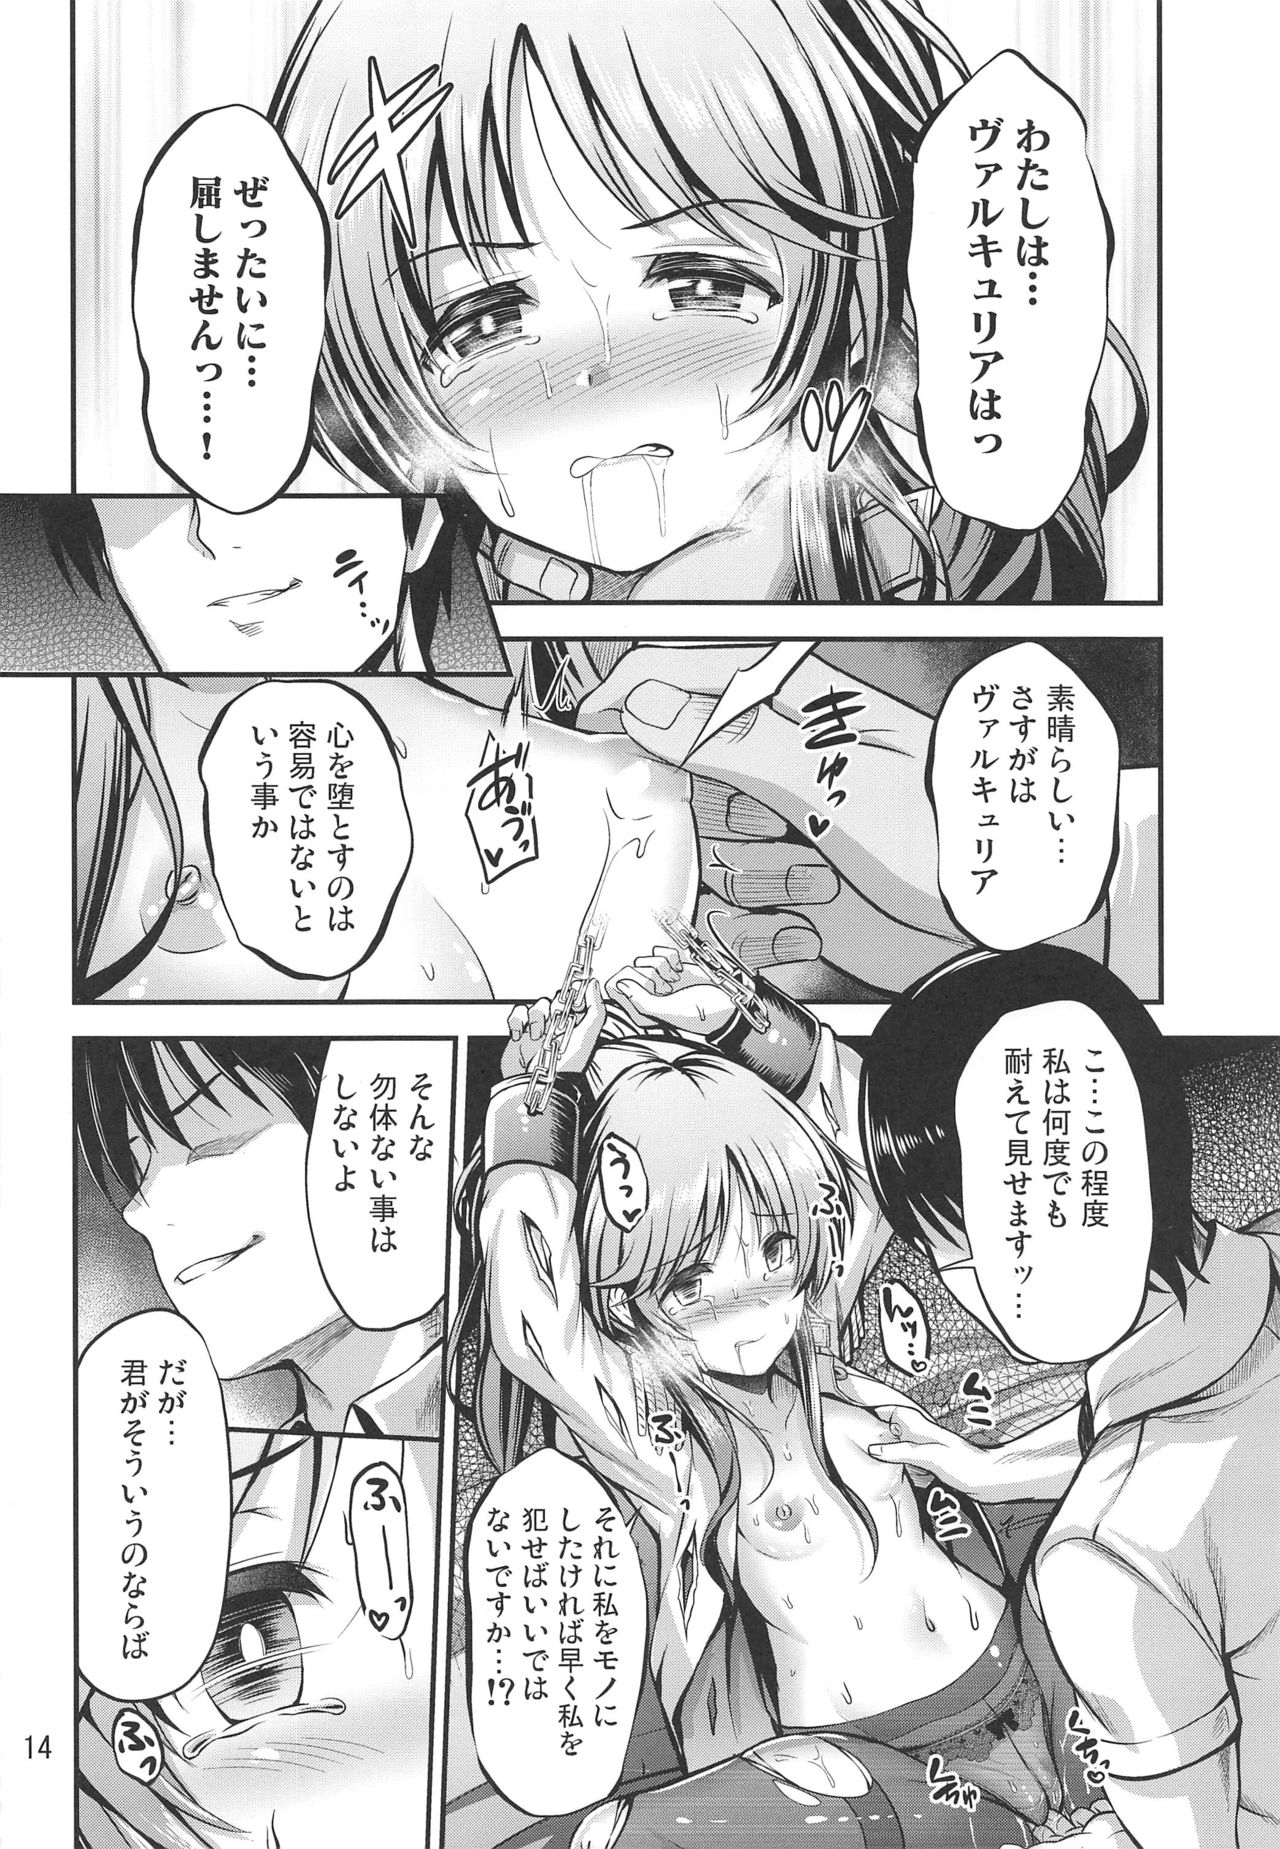 (Utahime Teien 20) [listless time (ment)] Valkyrie Aiko Dai Pinch!! (THE IDOLM@STER CINDERELLA GIRLS) page 13 full